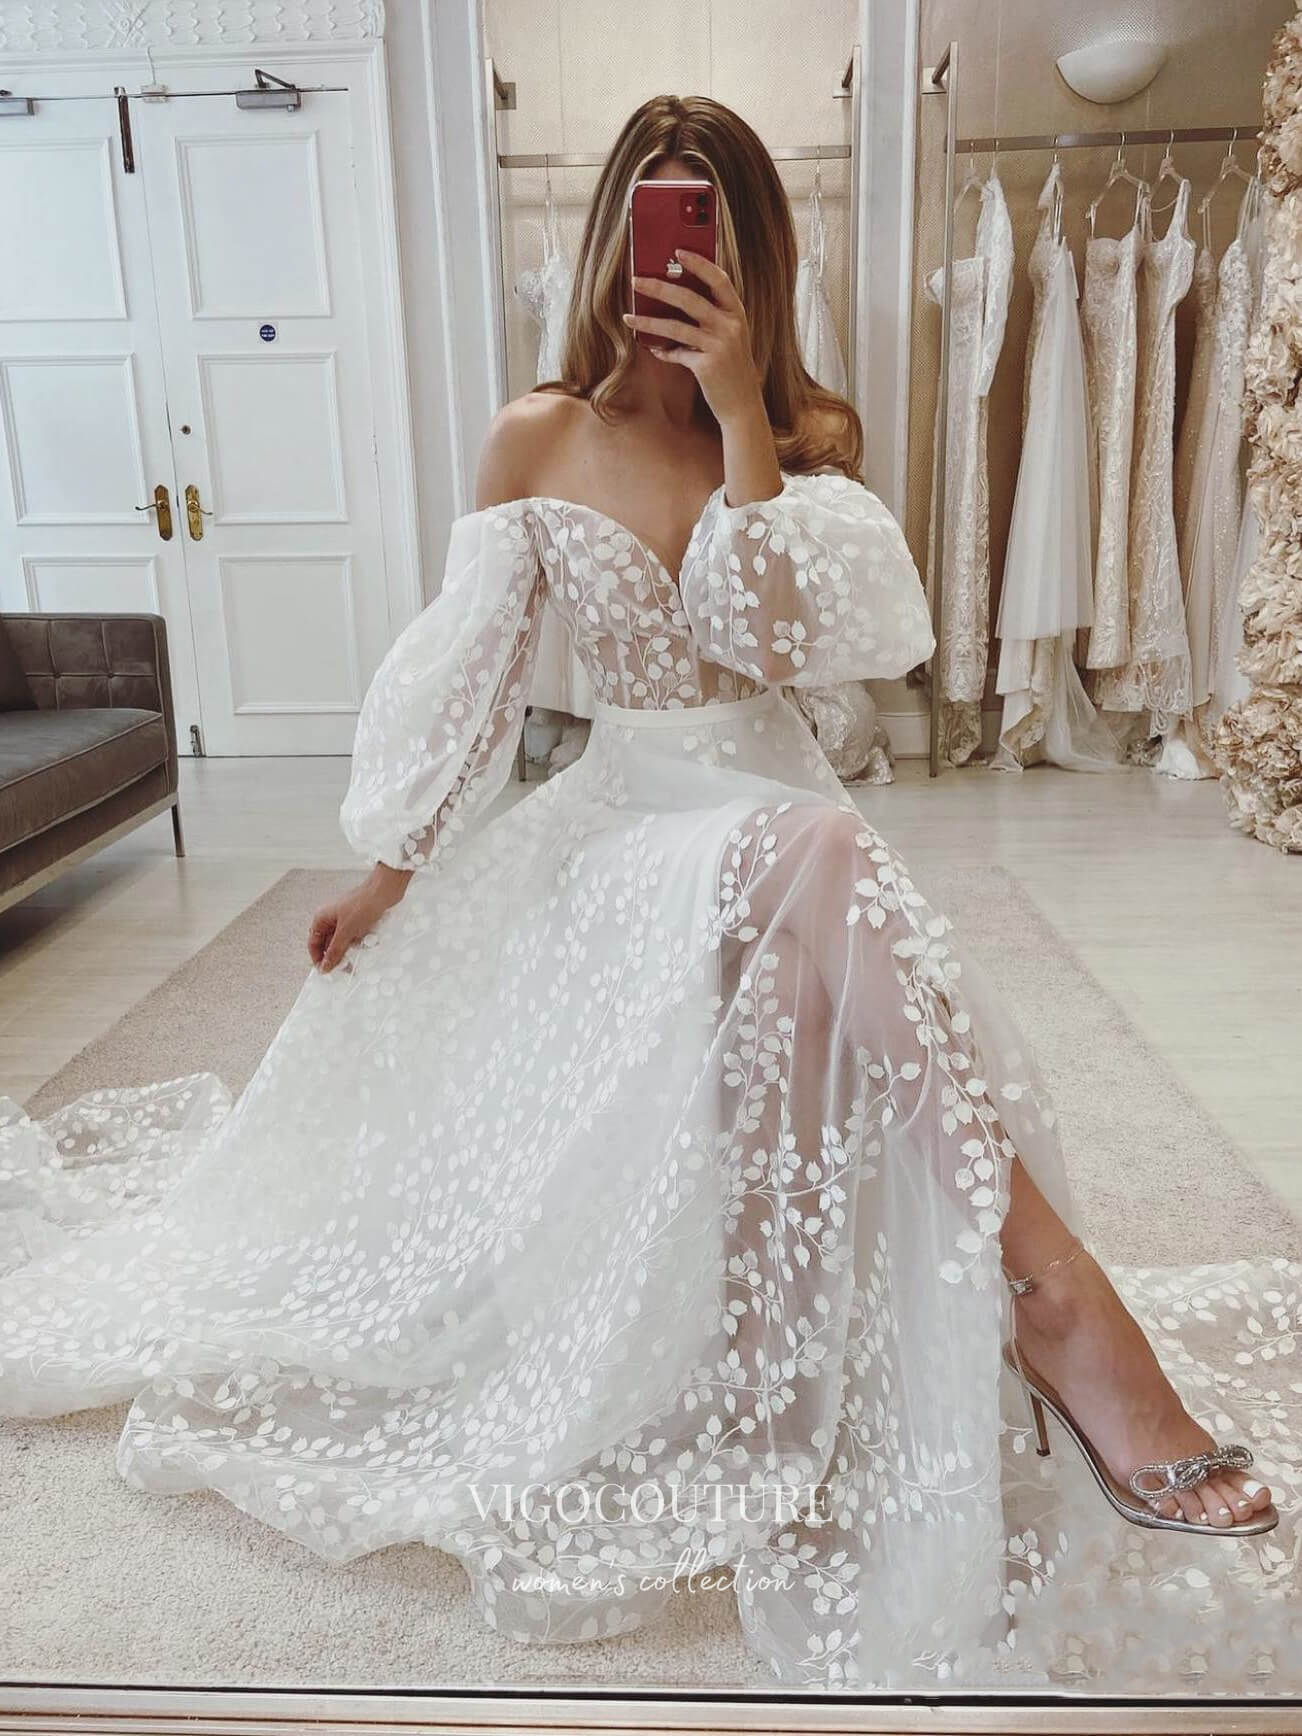 vigocouture Lace Applique Long Sleeve Wedding Dresses A-Line Sweetheart Neck Bridal Dresses W0065 As Pictured / US16